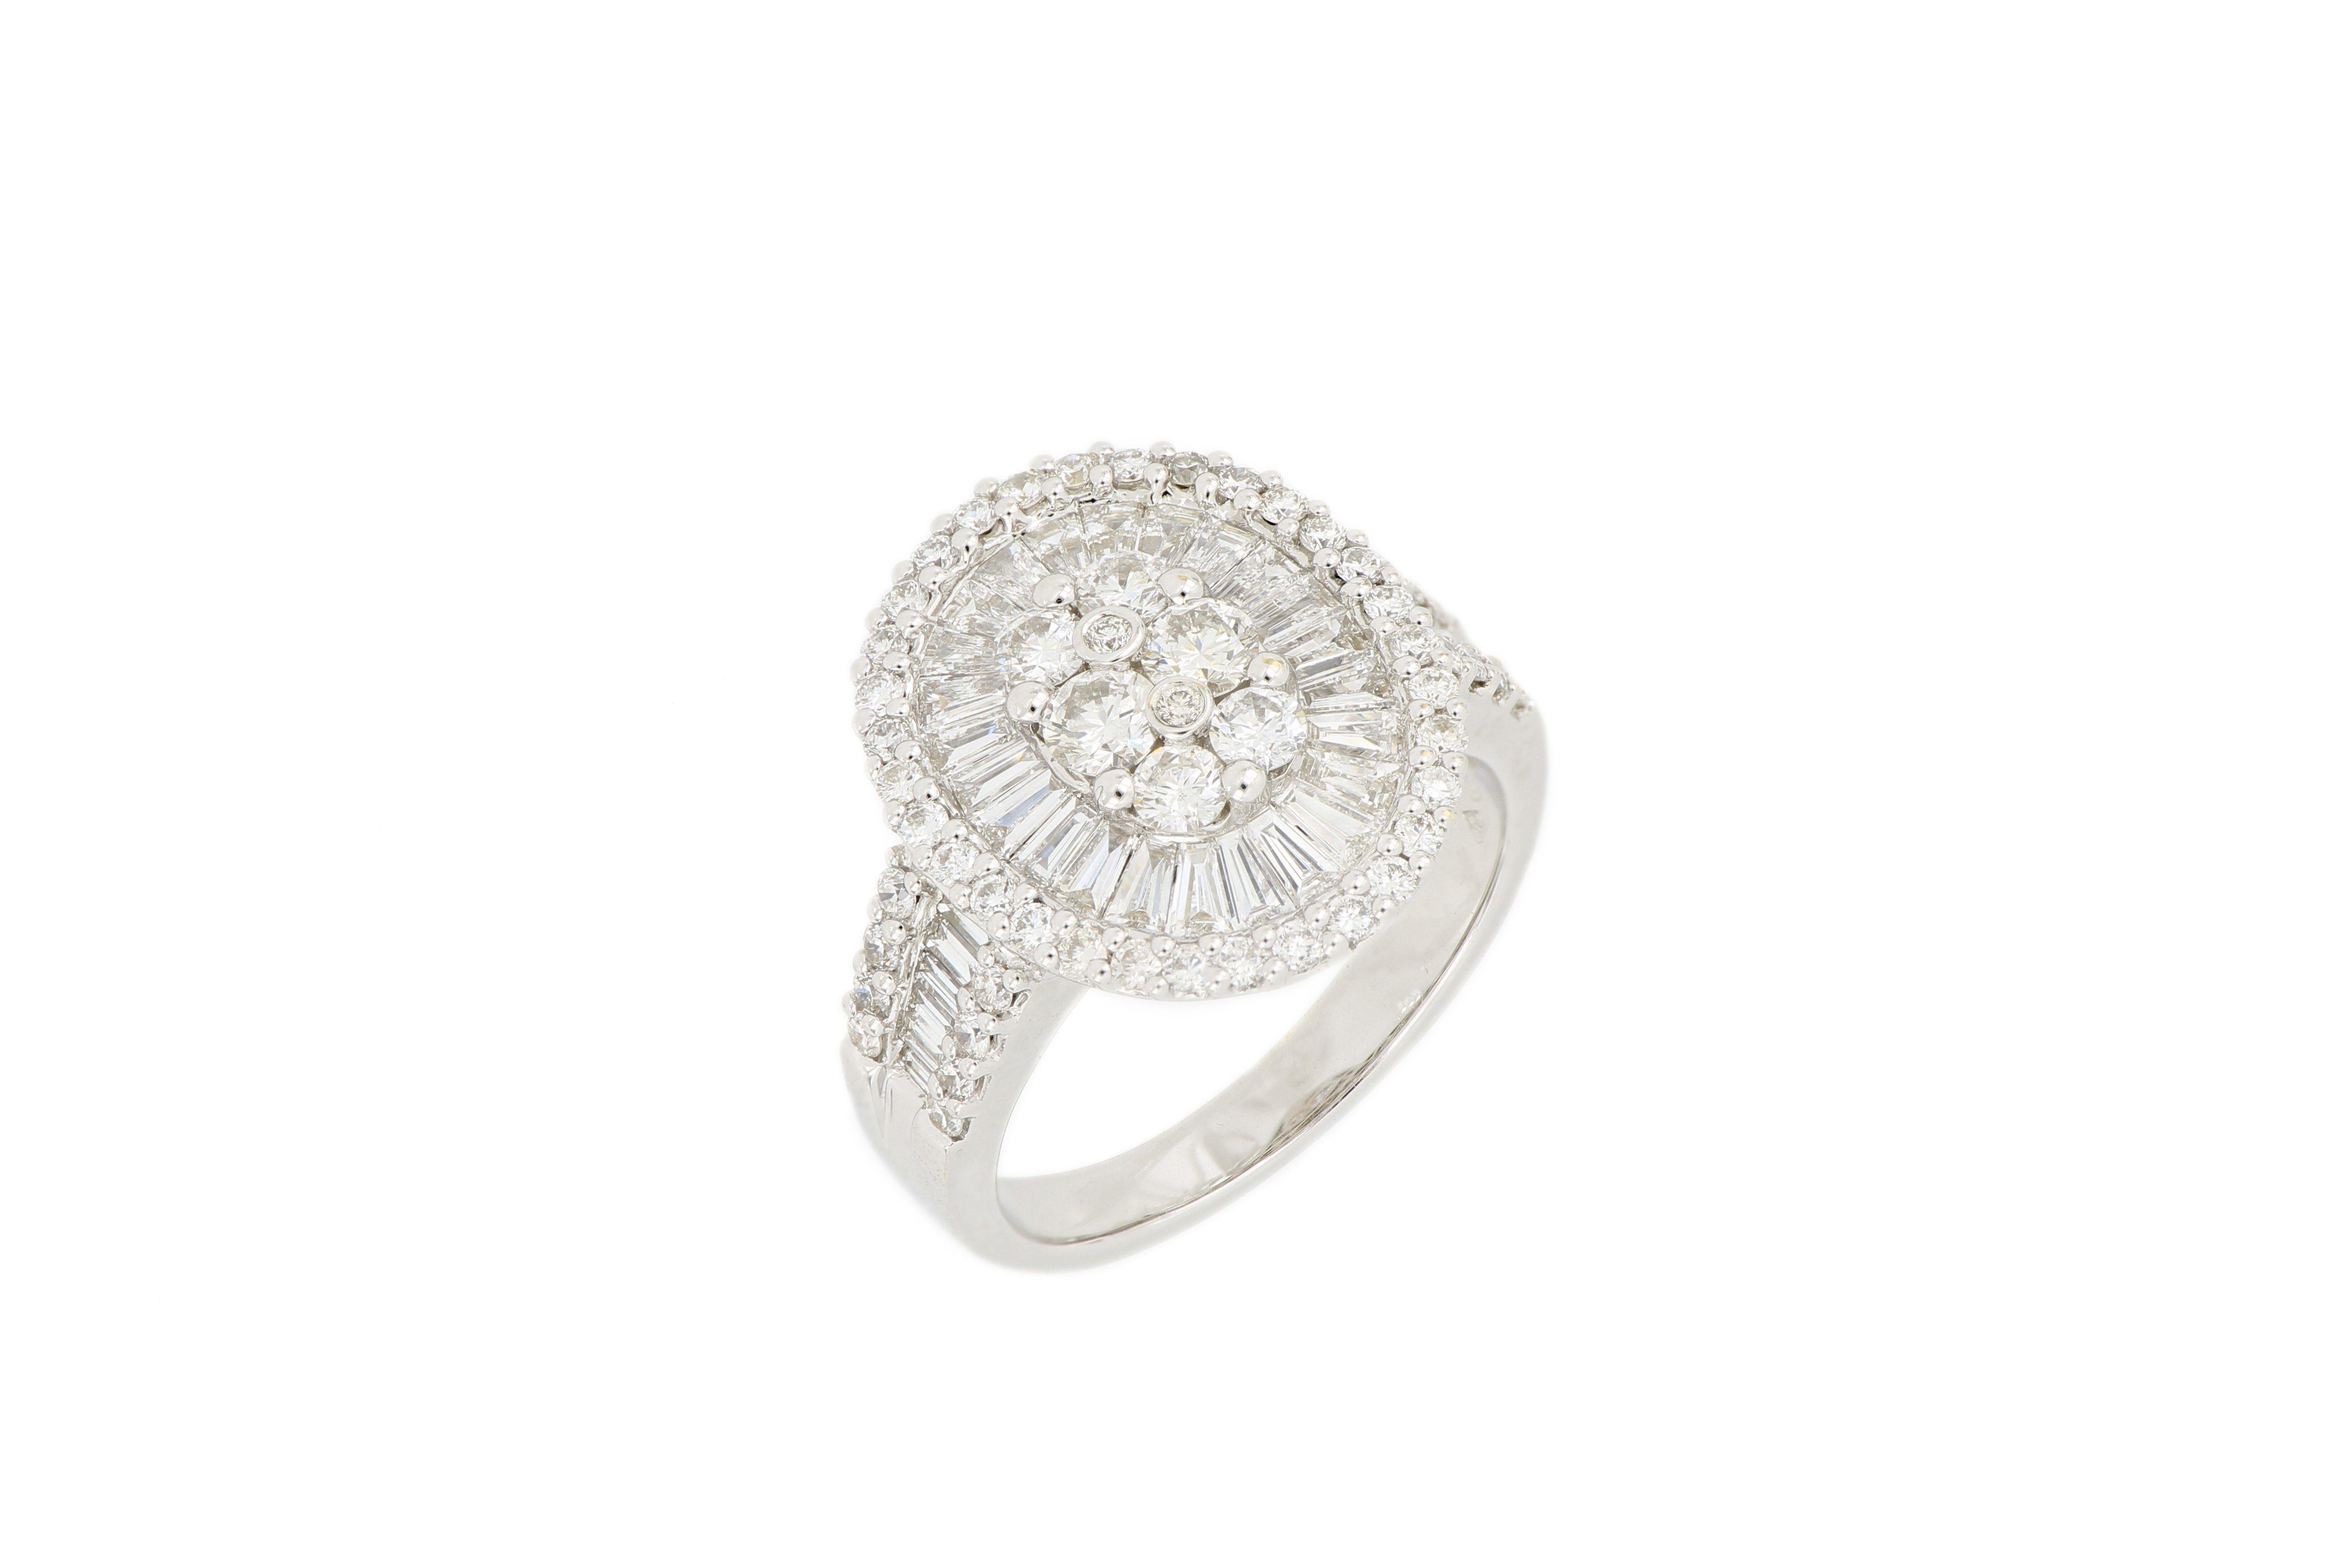 A diamond ring, composed of baguette diamonds and brilliant-cut diamonds weighing approximately 1.95 carats, mounted in 18 Karat white gold.
A beautiful ring which can be worn for any occasion.
The brand is renowned for its high jewellery